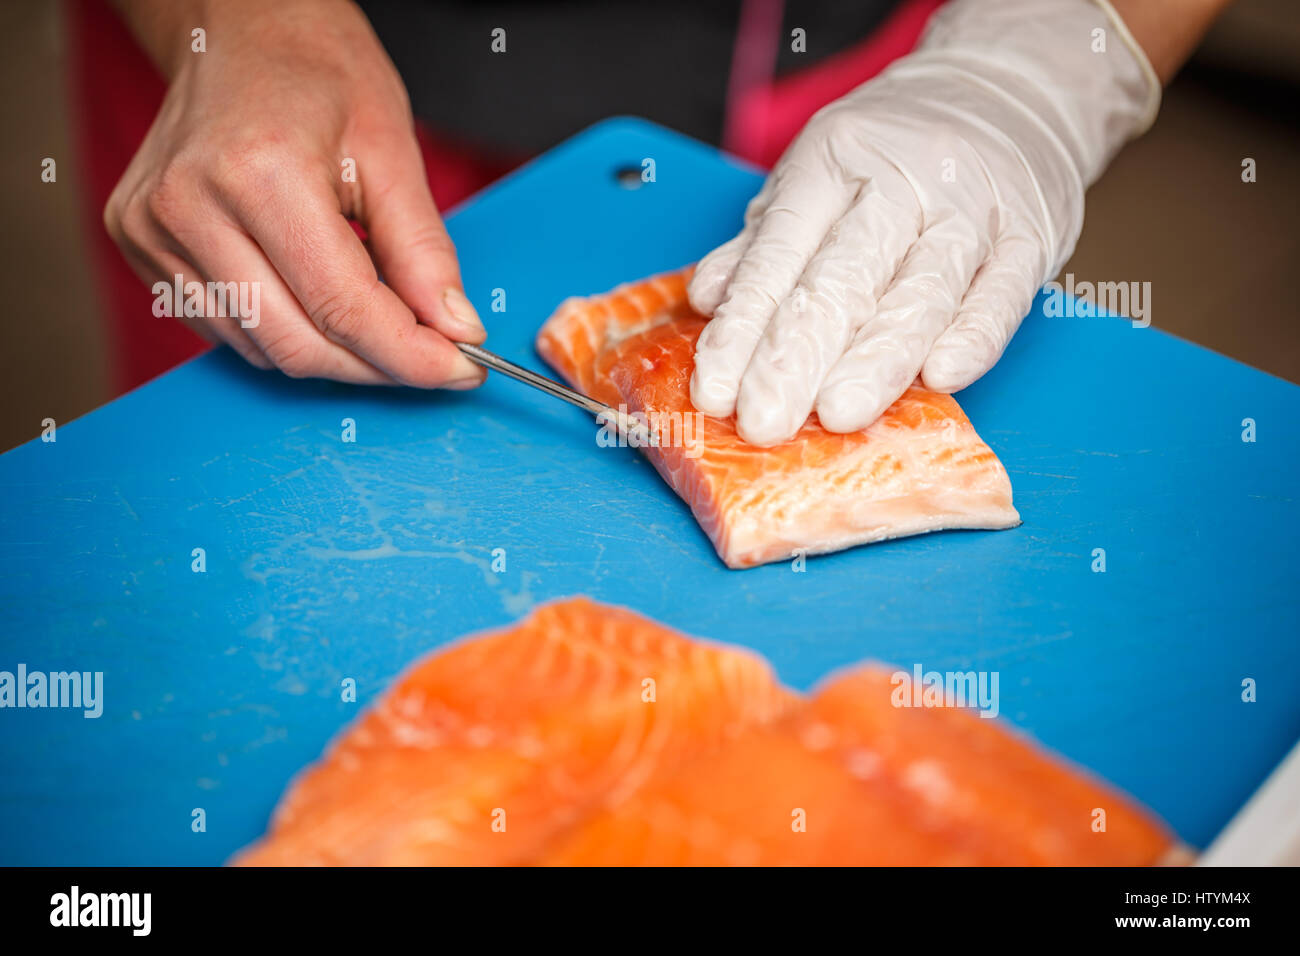 Chef is removing fish bone from salmon. Stock Photo